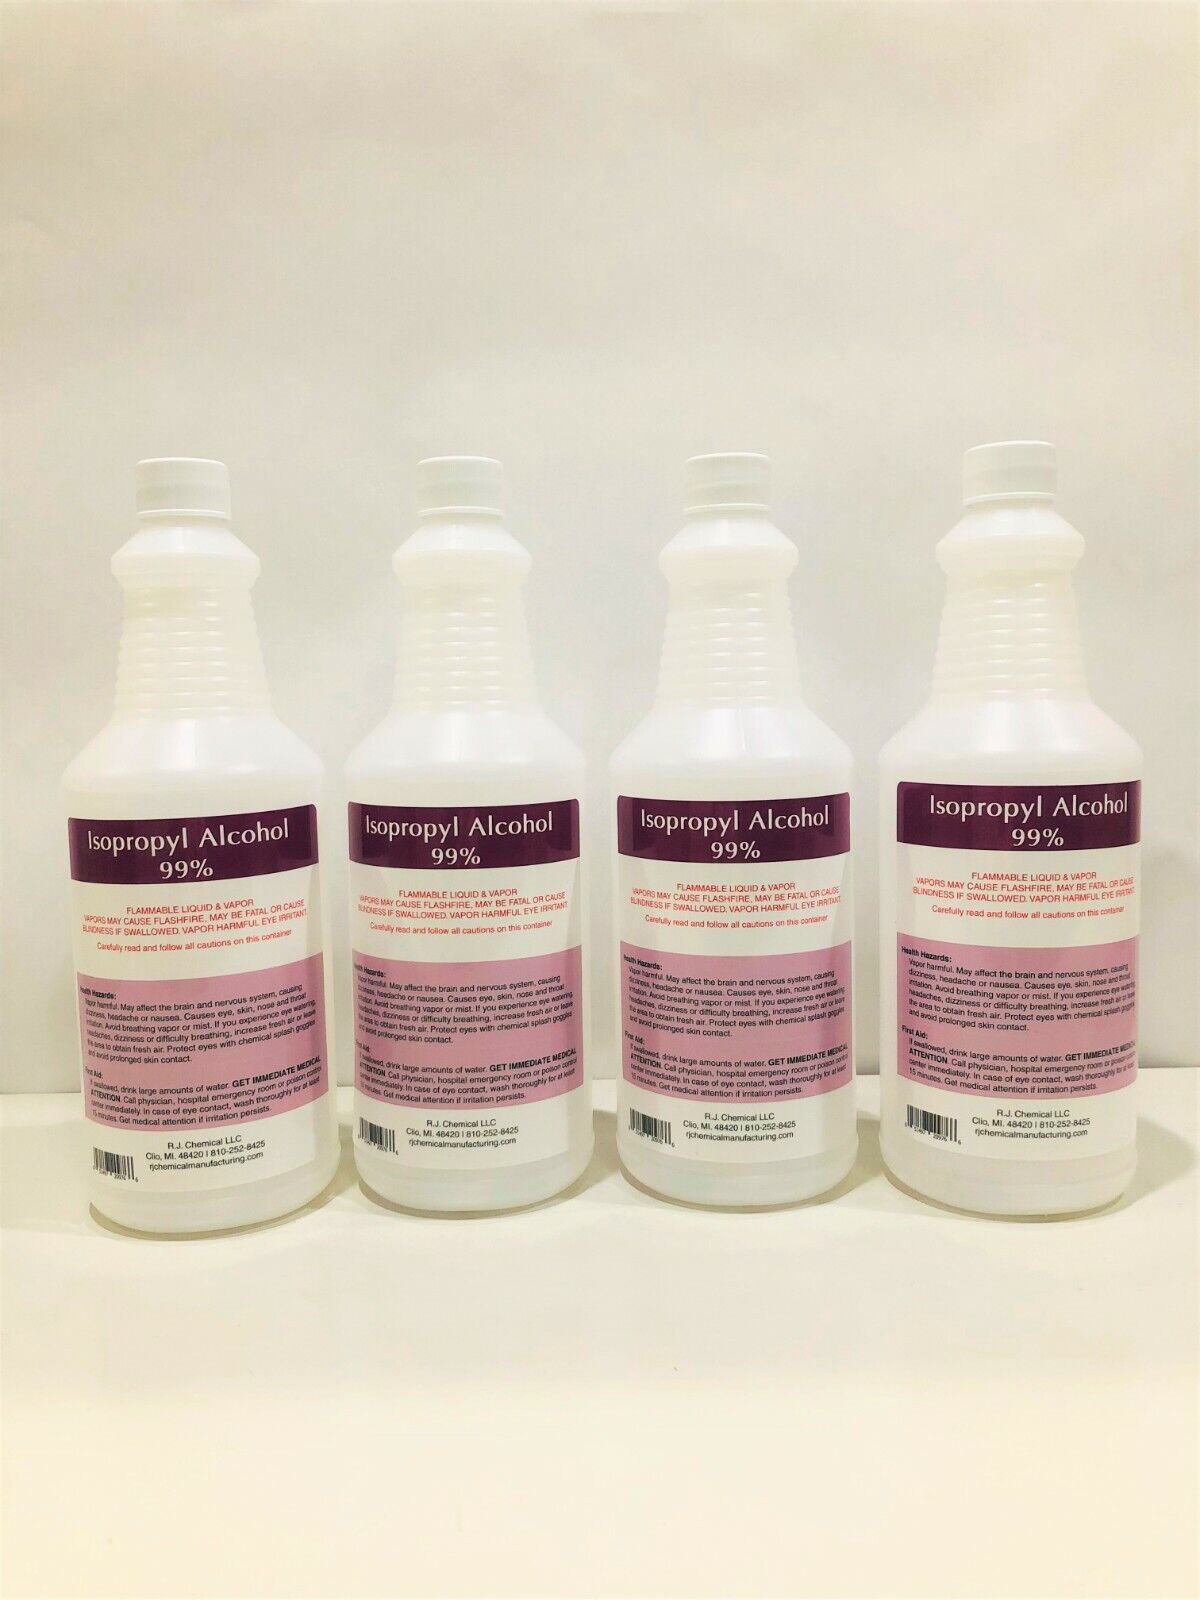 1 GALLON - PACKED IN 4 QTS- ISOPROPYL ALCOHOL 99% -100% PURE